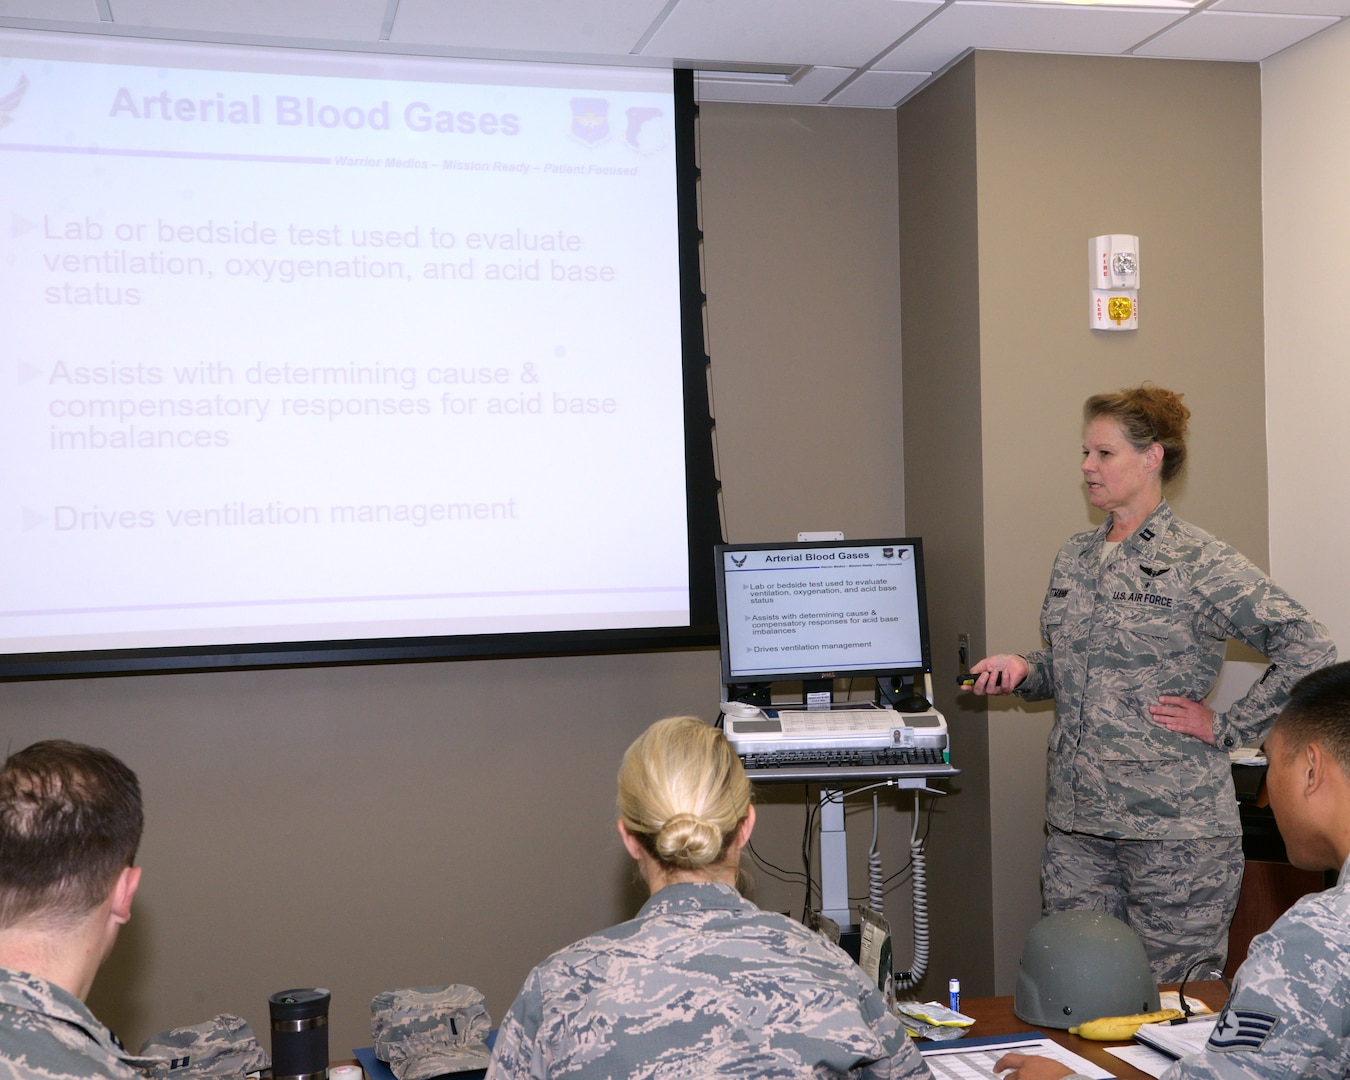 Capt. Laura Wittman, an Individual Mobilization Augmentee who is currently serving as a special projects officer in the 59th Medical Wing’s education and training department, conducts training for wing personnel on Aug. 9, 2018. IMAs are Air Force Reservists assigned to one of more than 50 active-component units and government agencies around the world. (U.S. Air Force photo by Daniel J. Calderón)